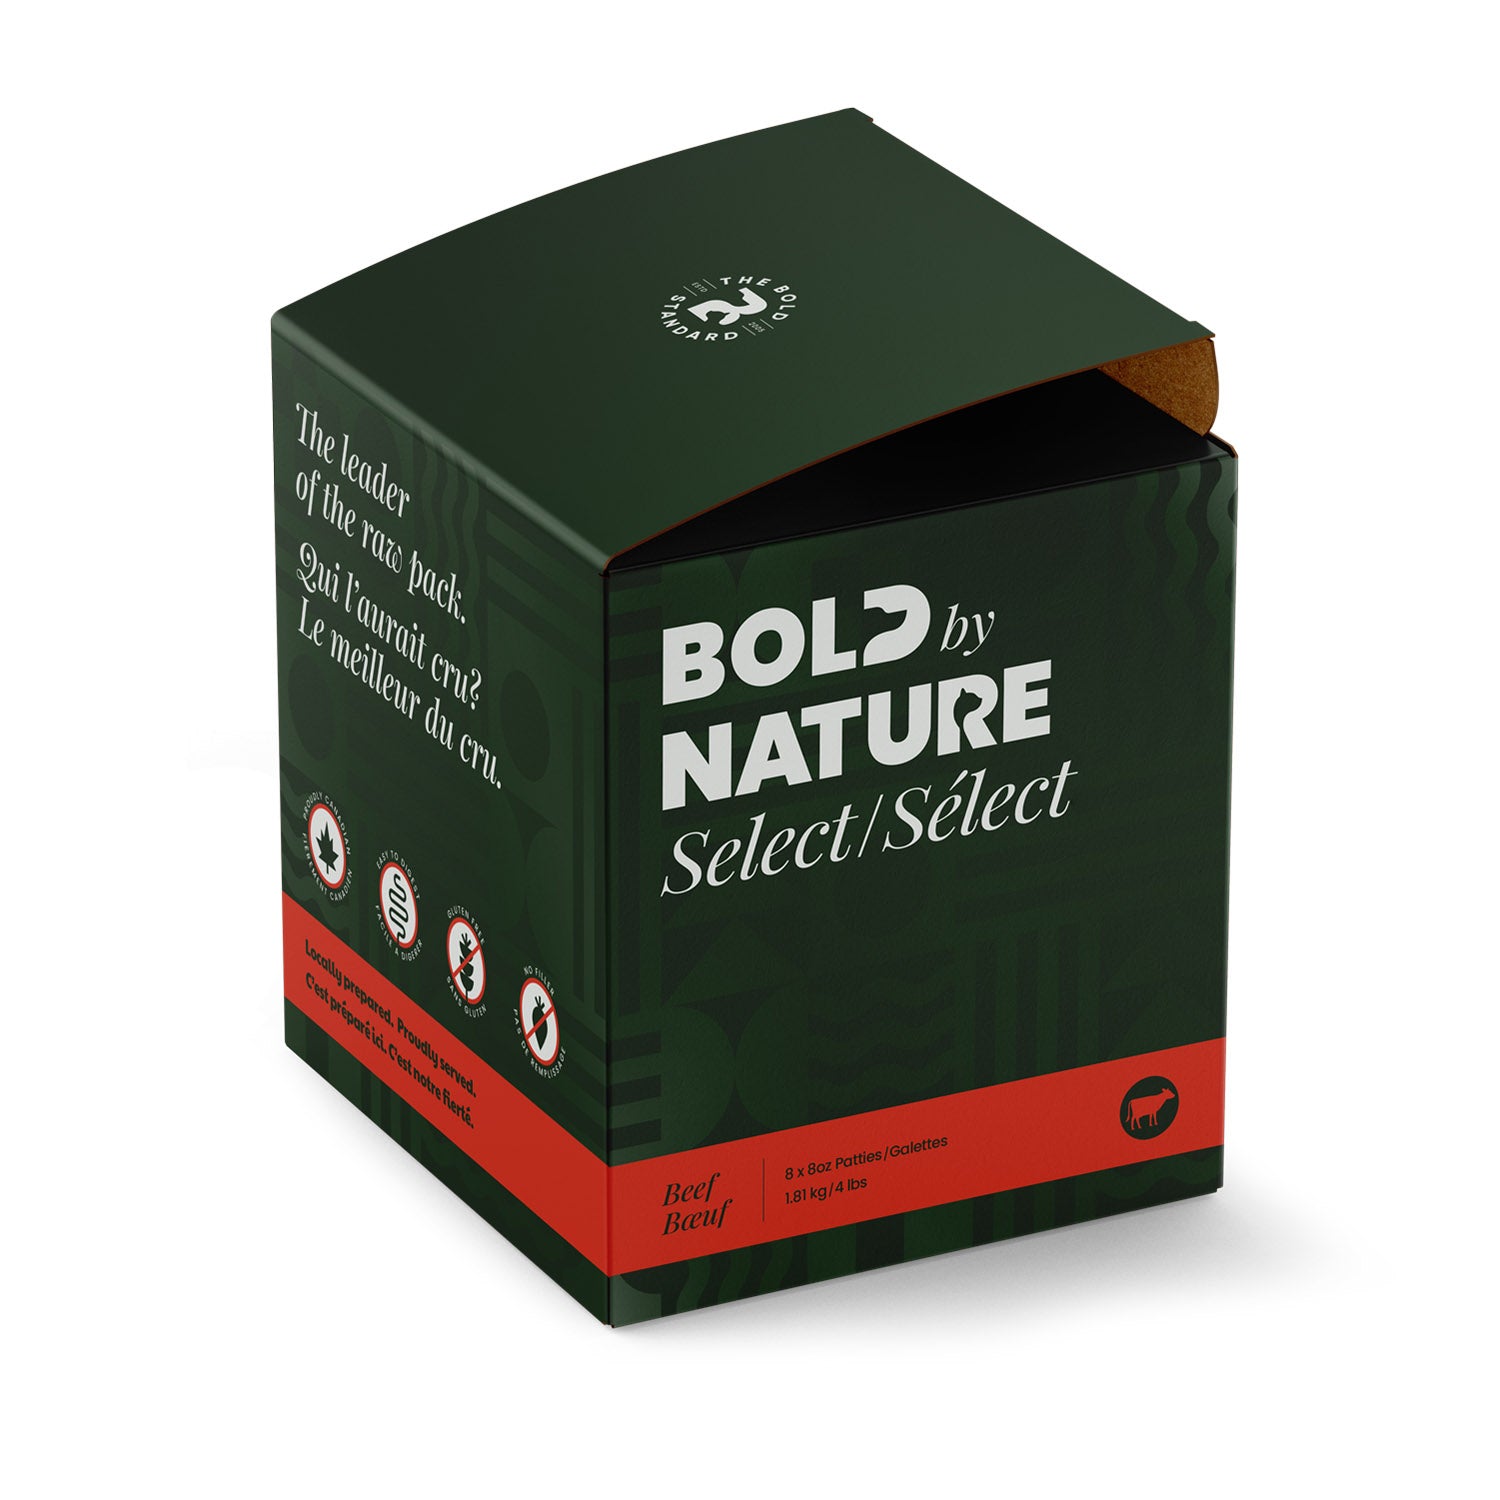 Bold by Nature (Bold Raw) - Select Beef - Frozen Product